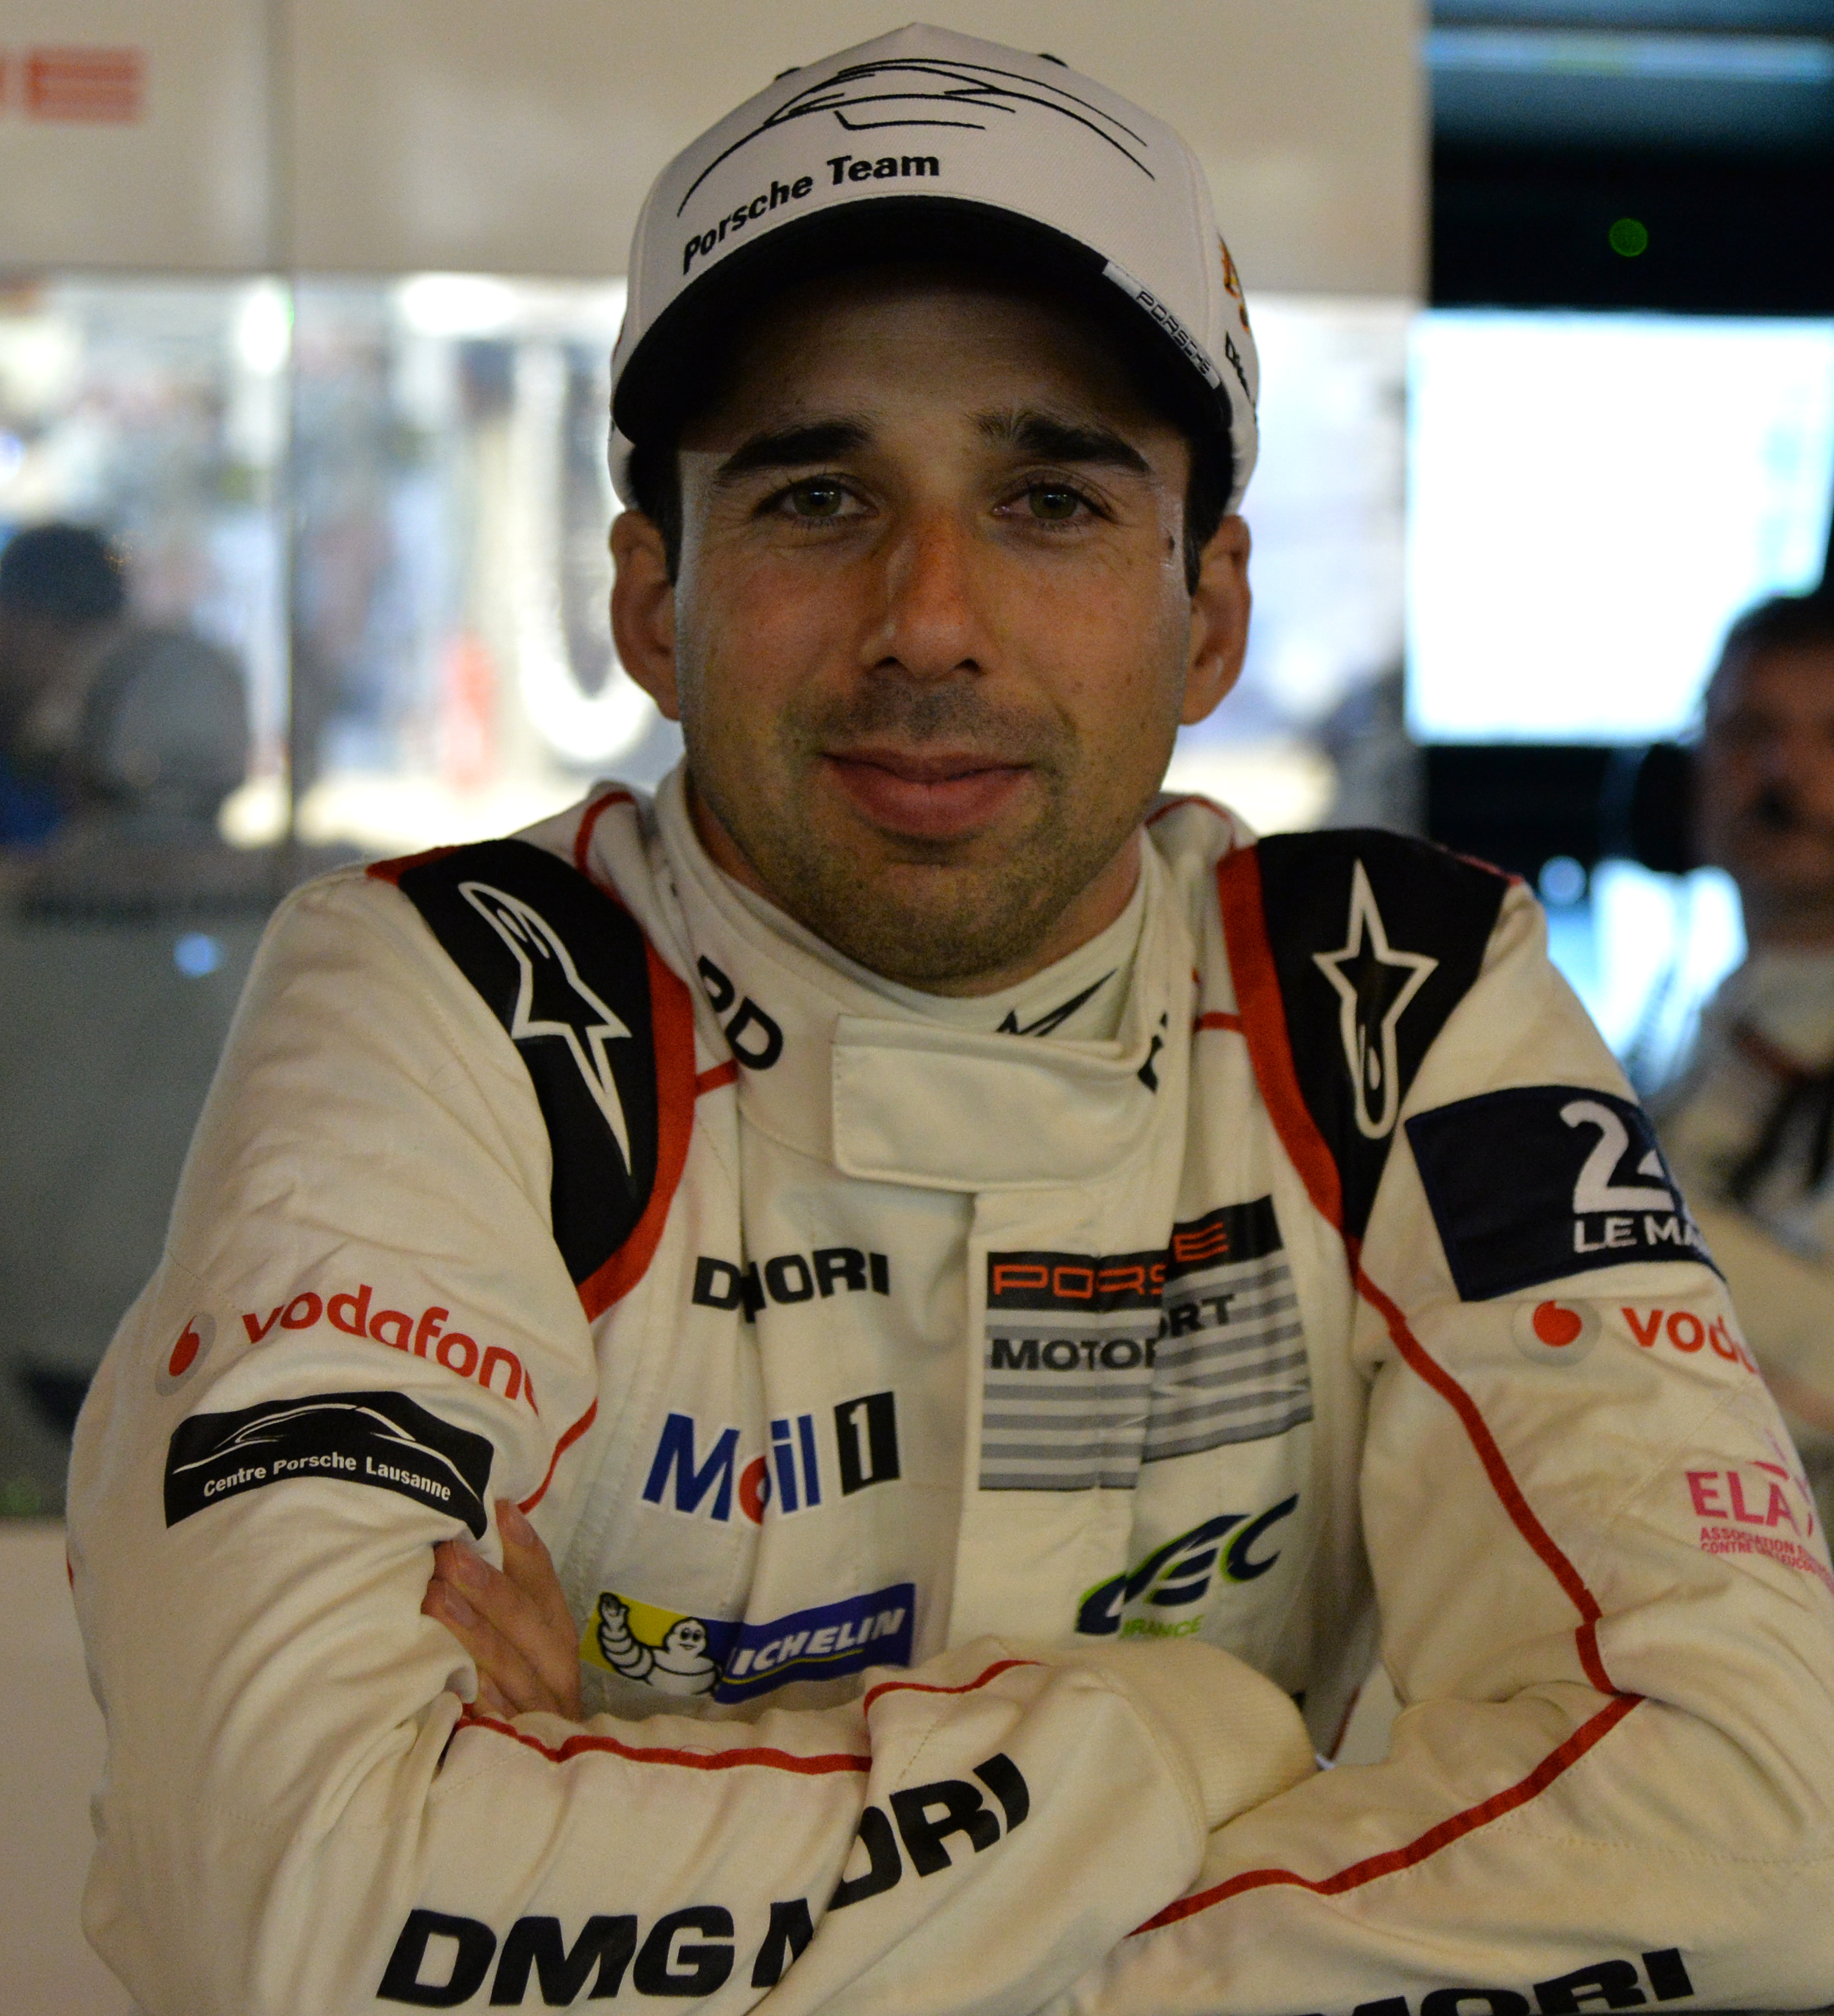 Switzerland's Neel Jani waits in the pit lane during the second qualifying practice session of the 84th Le Mans 24 hours endurance race, on June 16, 2016 in Le Mans, western France. Switzerland's Neel Jani, behind the wheel of a Porsche 919 Hybrid, stayed on pole position for the Le Mans 24 Hour Race on June 16 when the third qualifying session was red-flagged due to heavy rain. / AFP PHOTO / JEAN-FRANCOIS MONIER